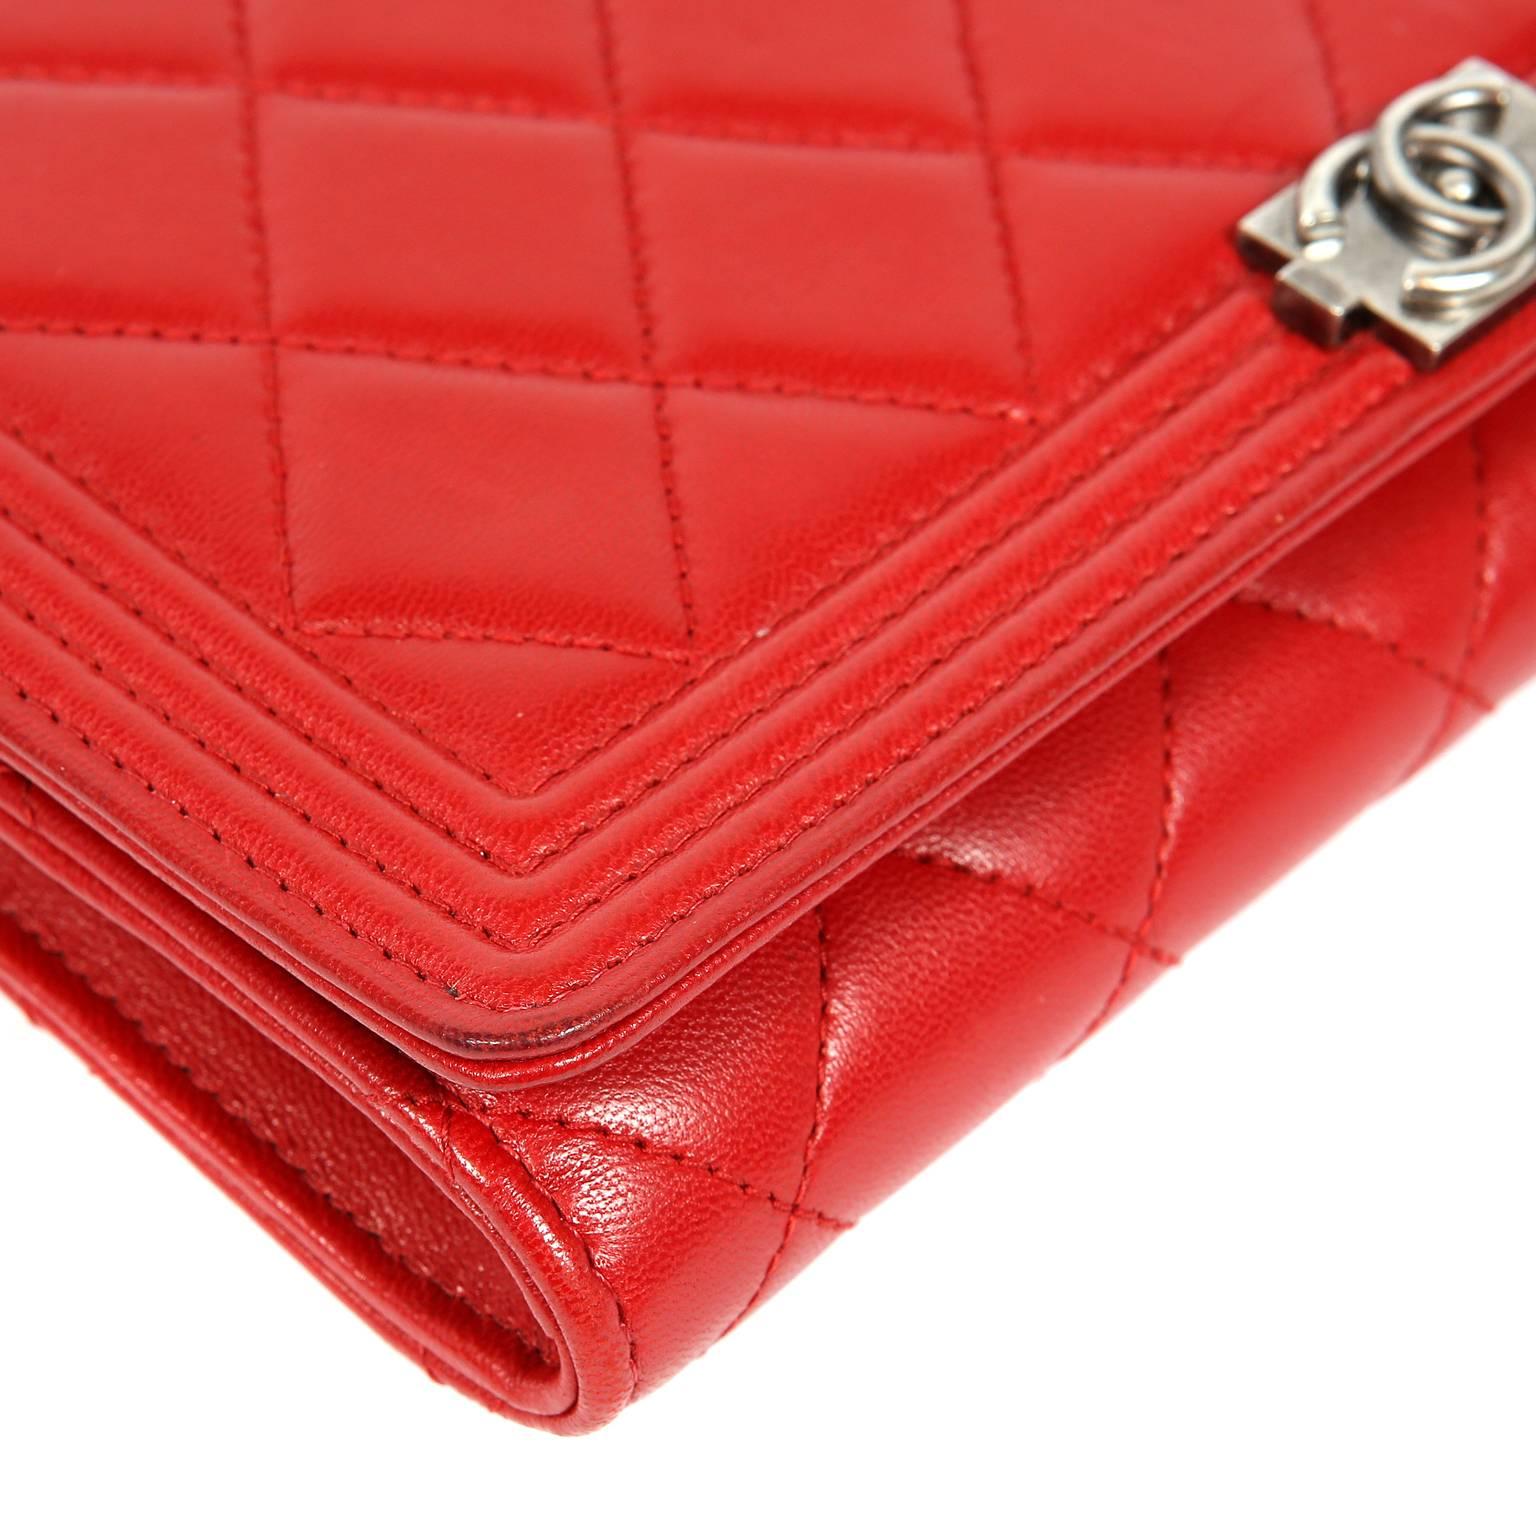 Chanel Red Leather Boy Bag Clutch with Chain 1